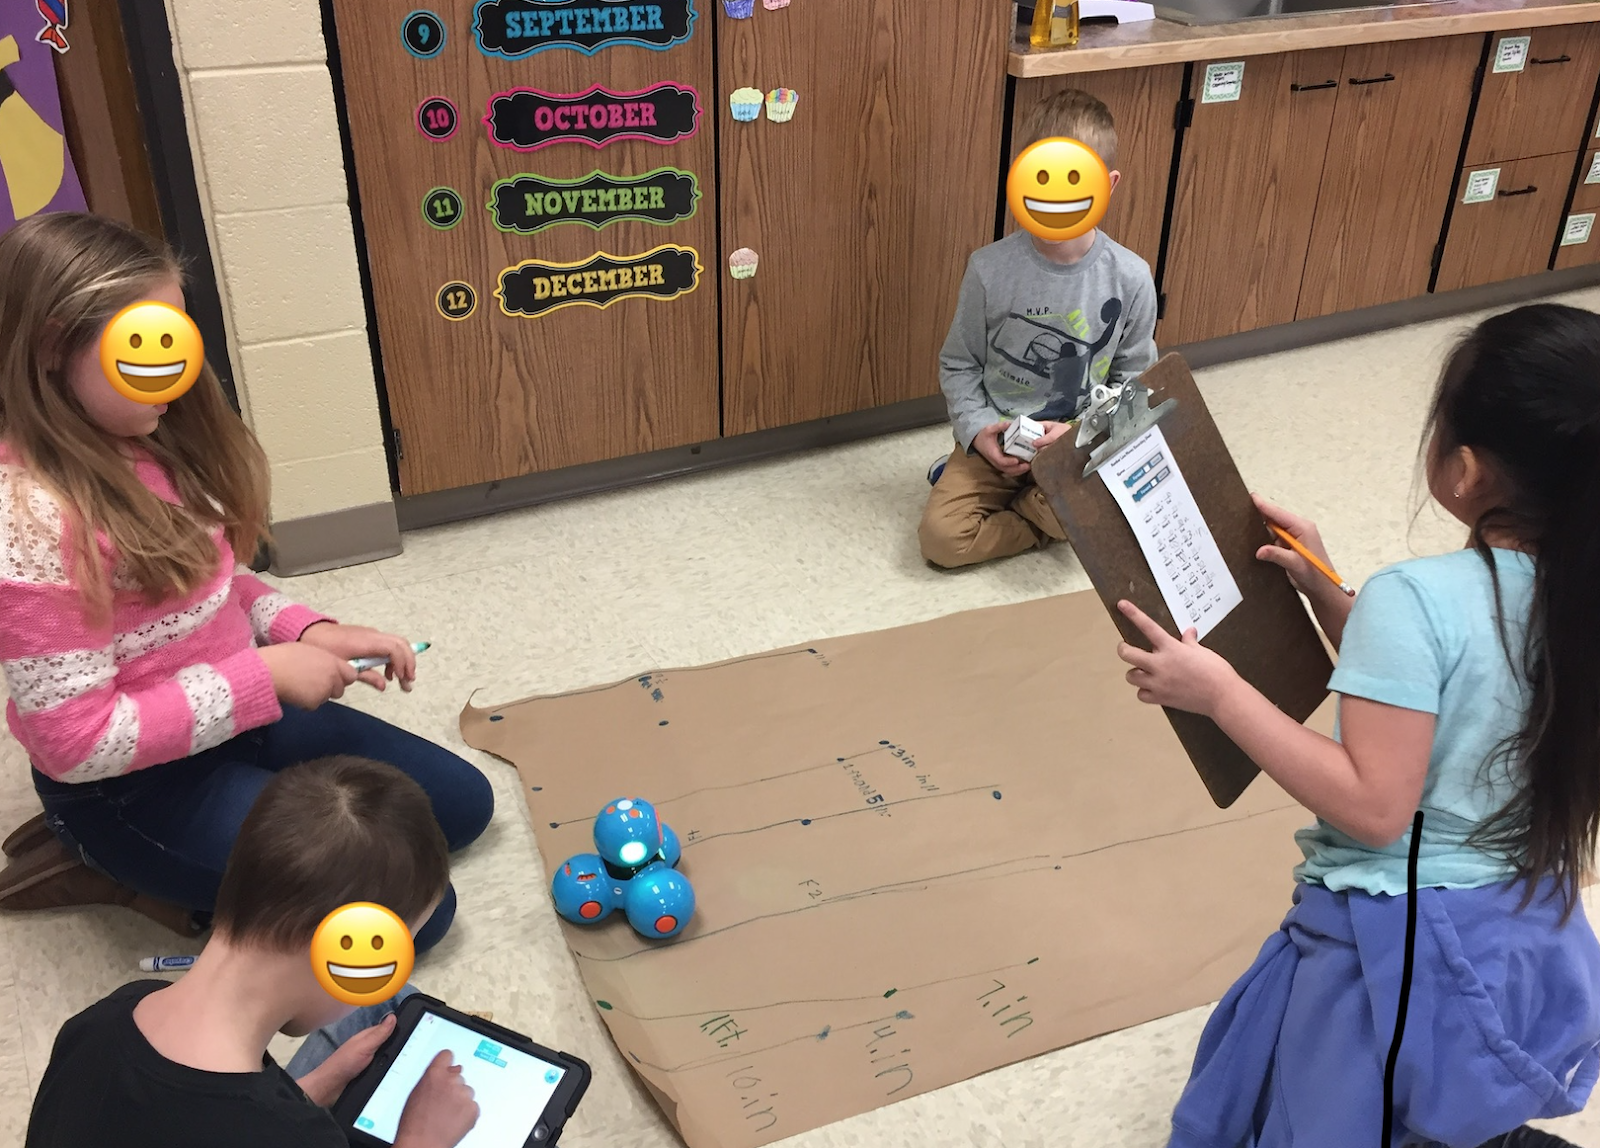 Four kindergarteners use collaboration to guide the robot